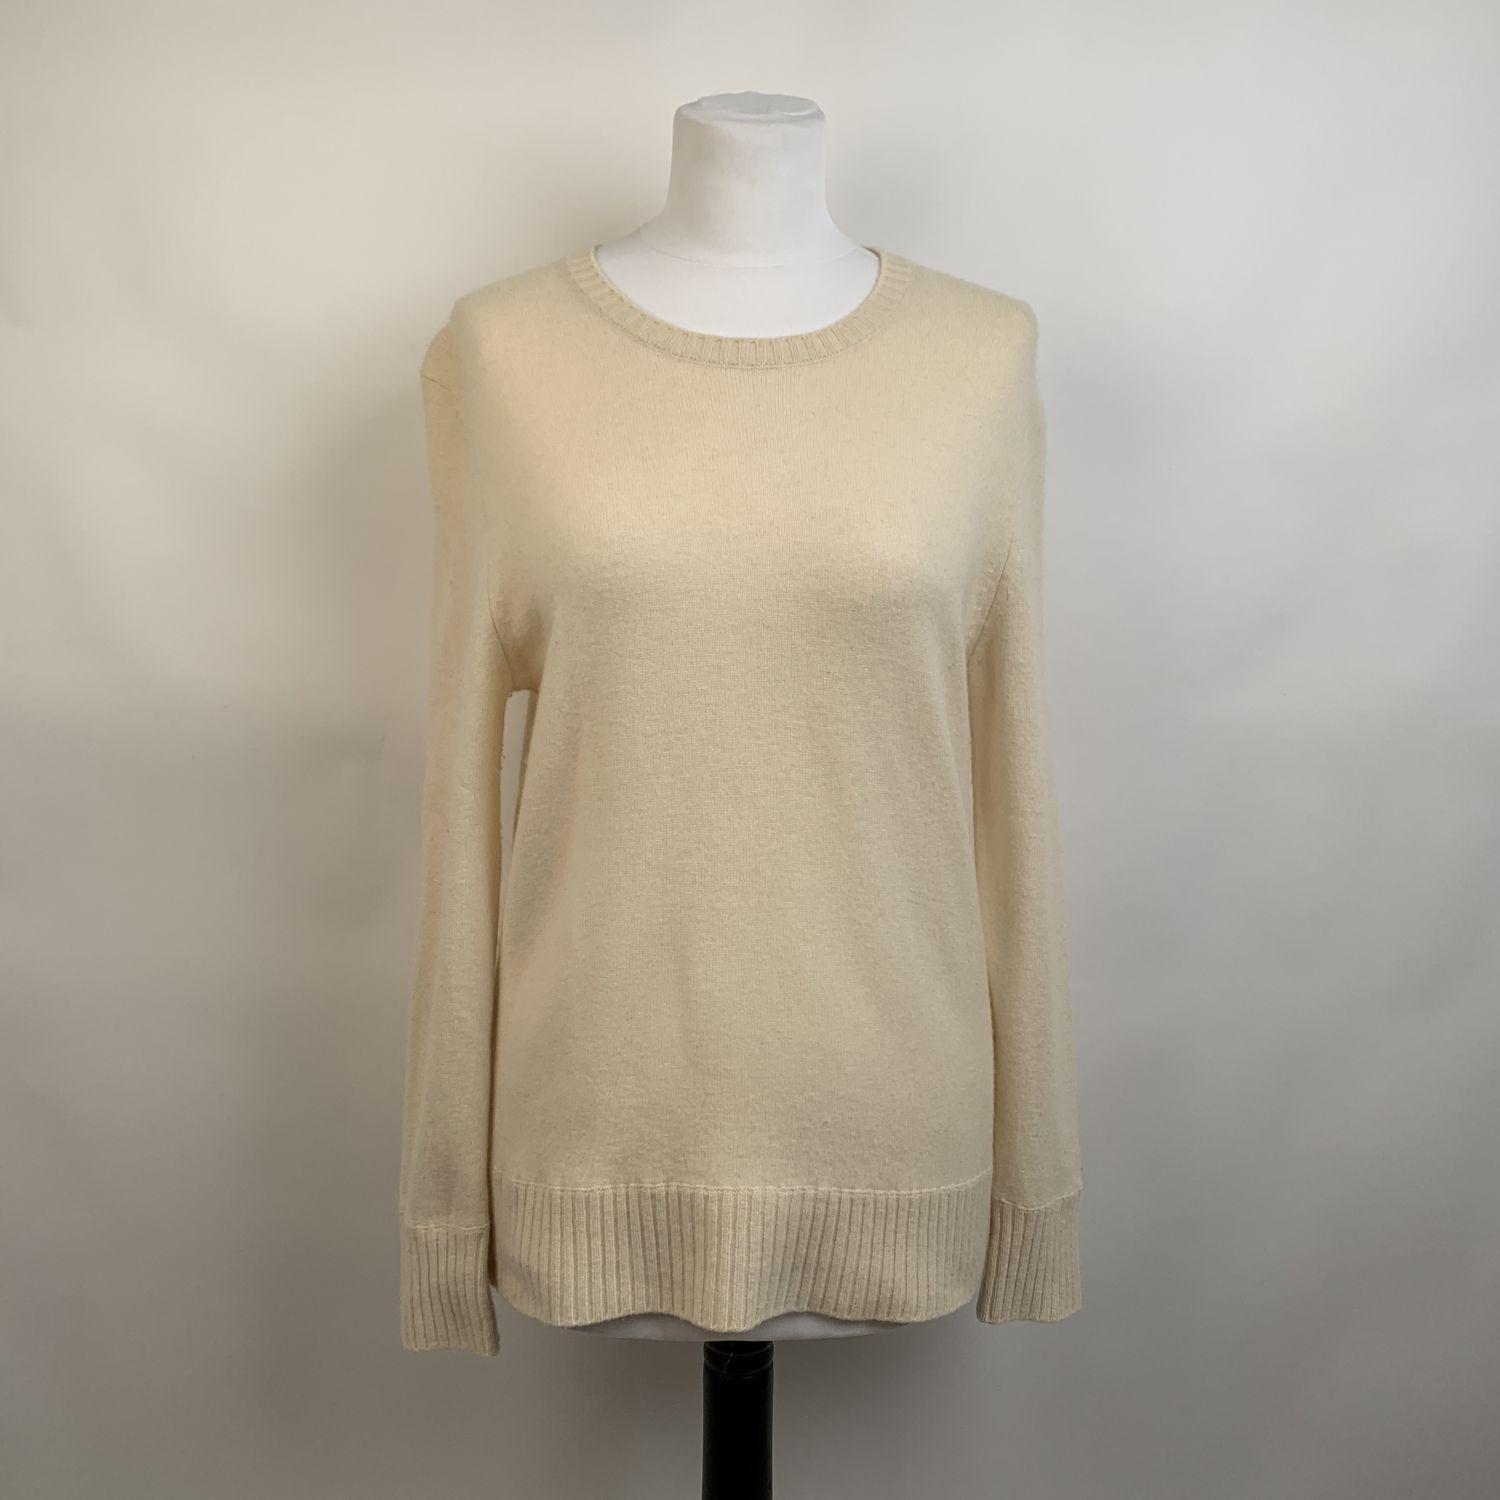 Long sleeve styling Laura Biagiotti jumper. Featuring boat neckline. Ivory color. Composition: 70% Merino Wool, 30% Cashemre. Size 40. it should correspond to a SMALL size.



Details

MATERIAL: Wool Blend

COLOR: Ivory

MODEL: Sweater

GENDER: